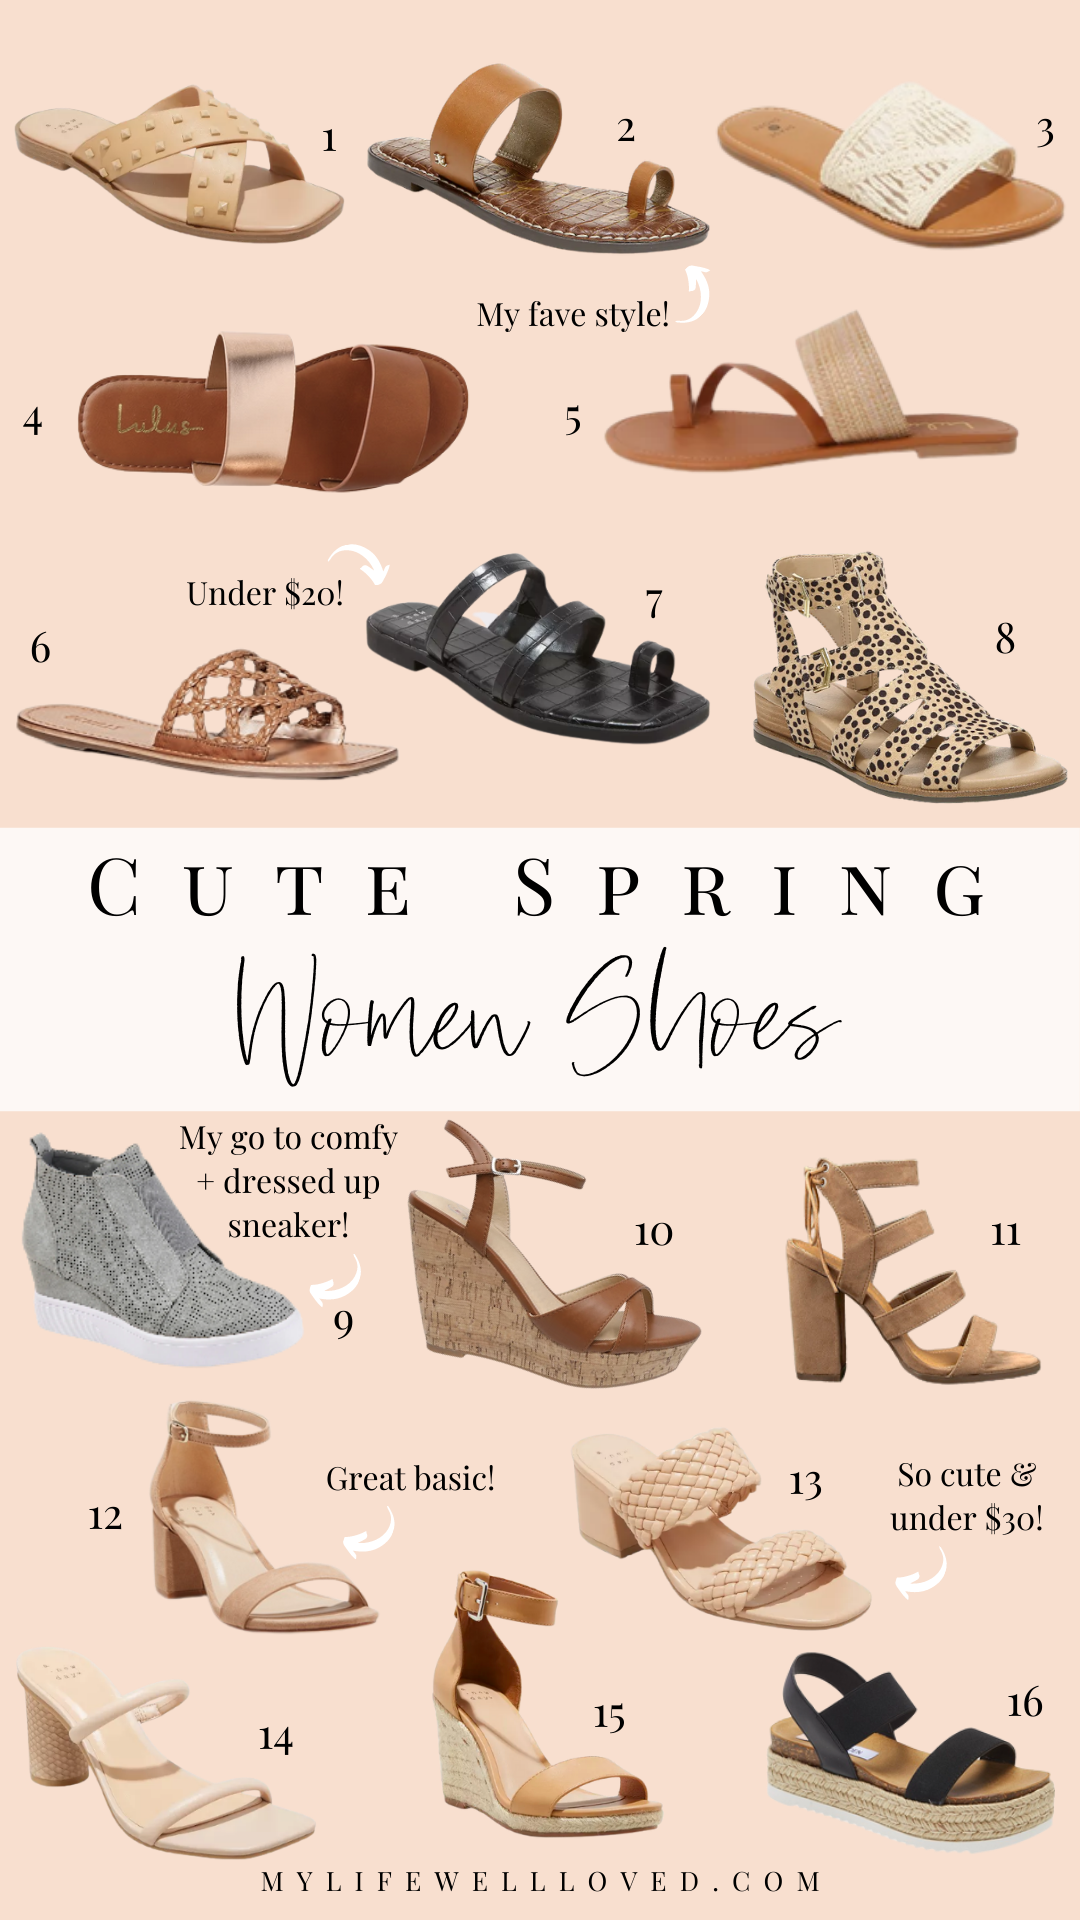 Target Favorites: Cute Spring Shoes For The Whole Family by Alabama Style + Fashion blogger, Heather Brown // My Life Well Loved